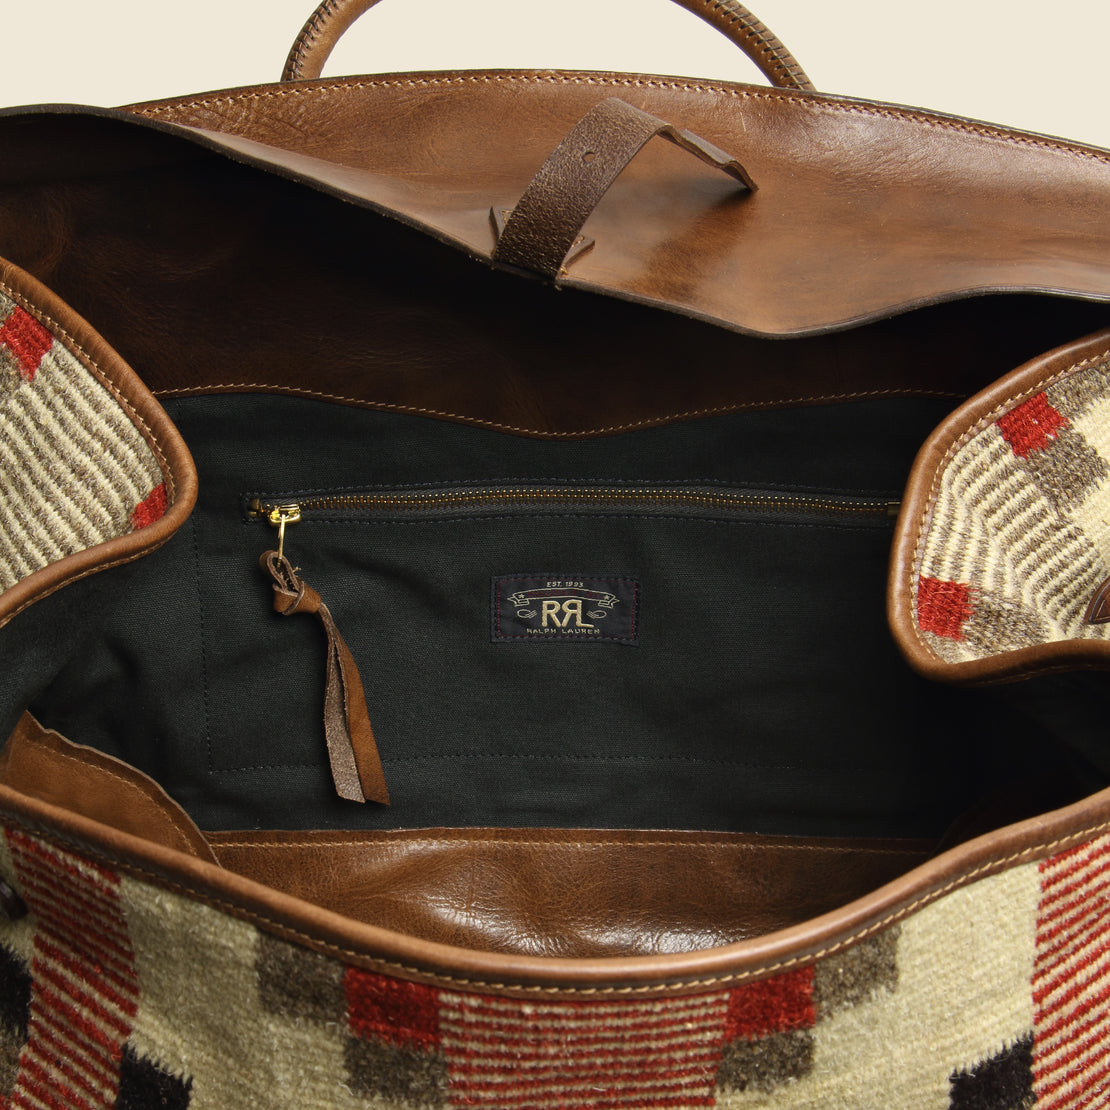 Pecos Blanket Duffle Bag - Cream  Multi/Brown - RRL - STAG Provisions - Accessories - Bags / Luggage